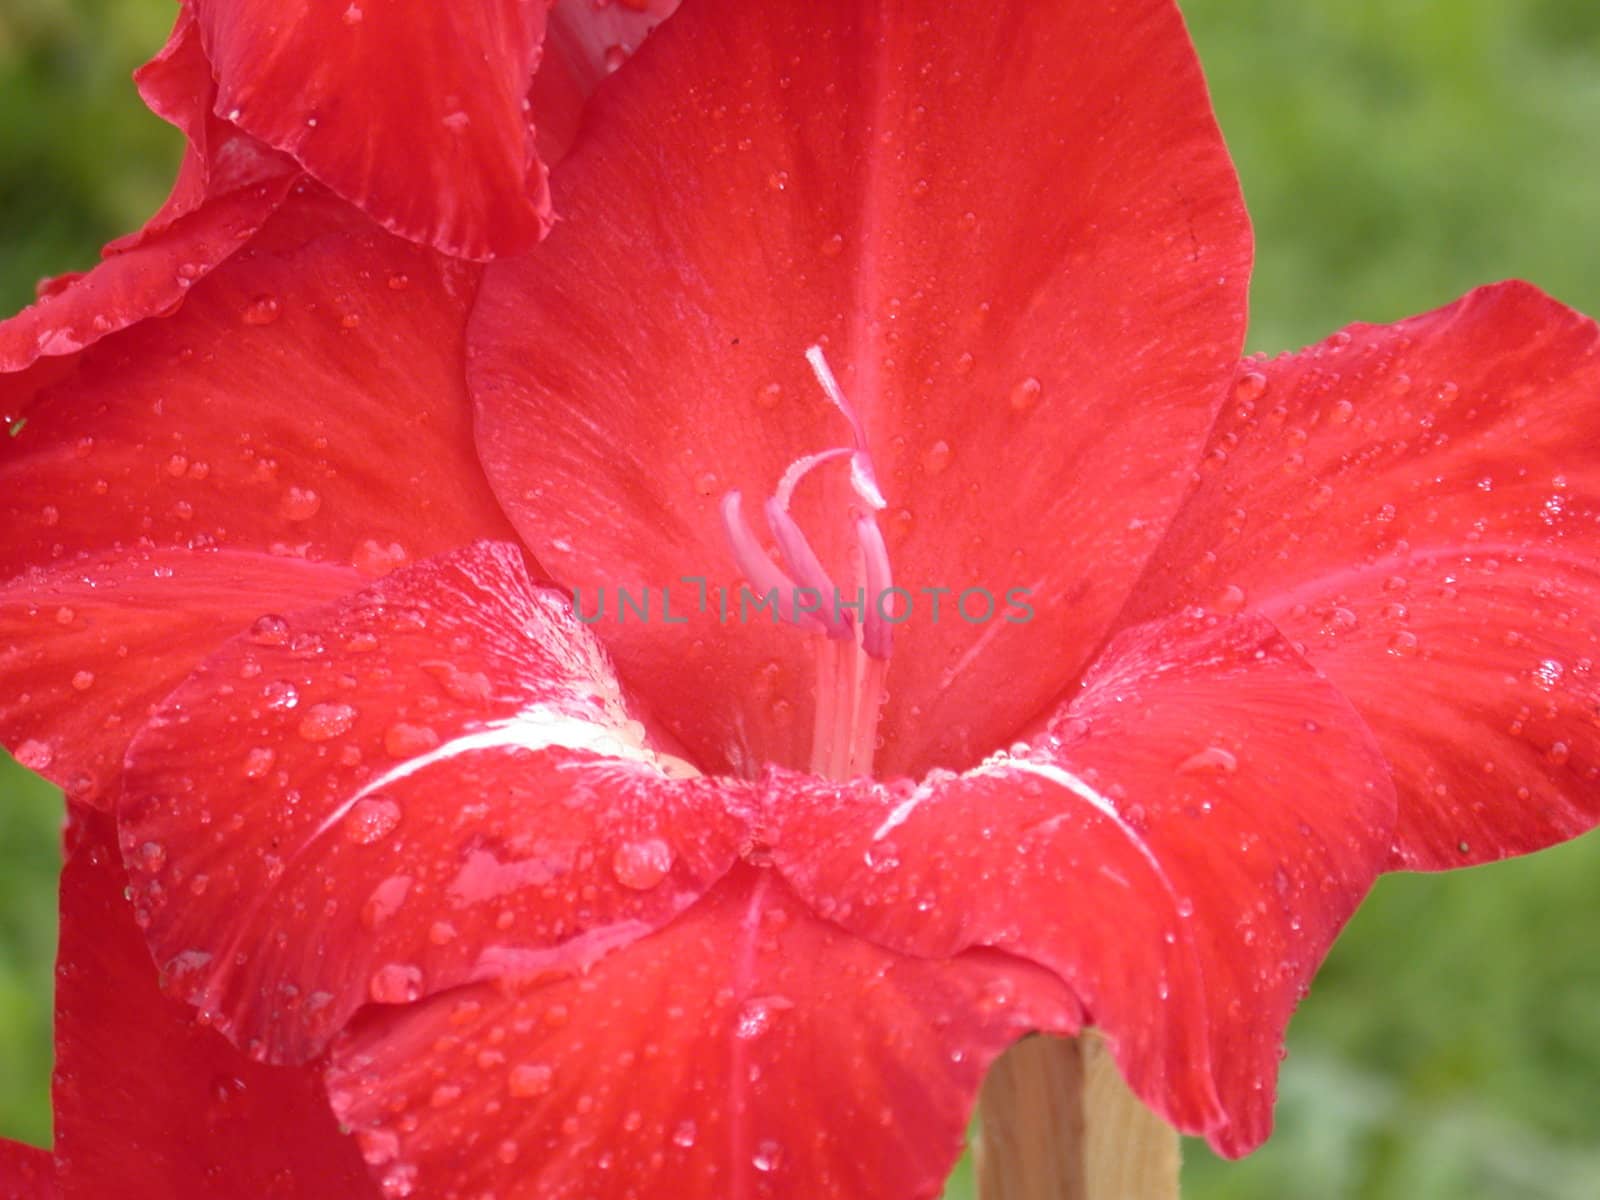 The red lily, macro, nature